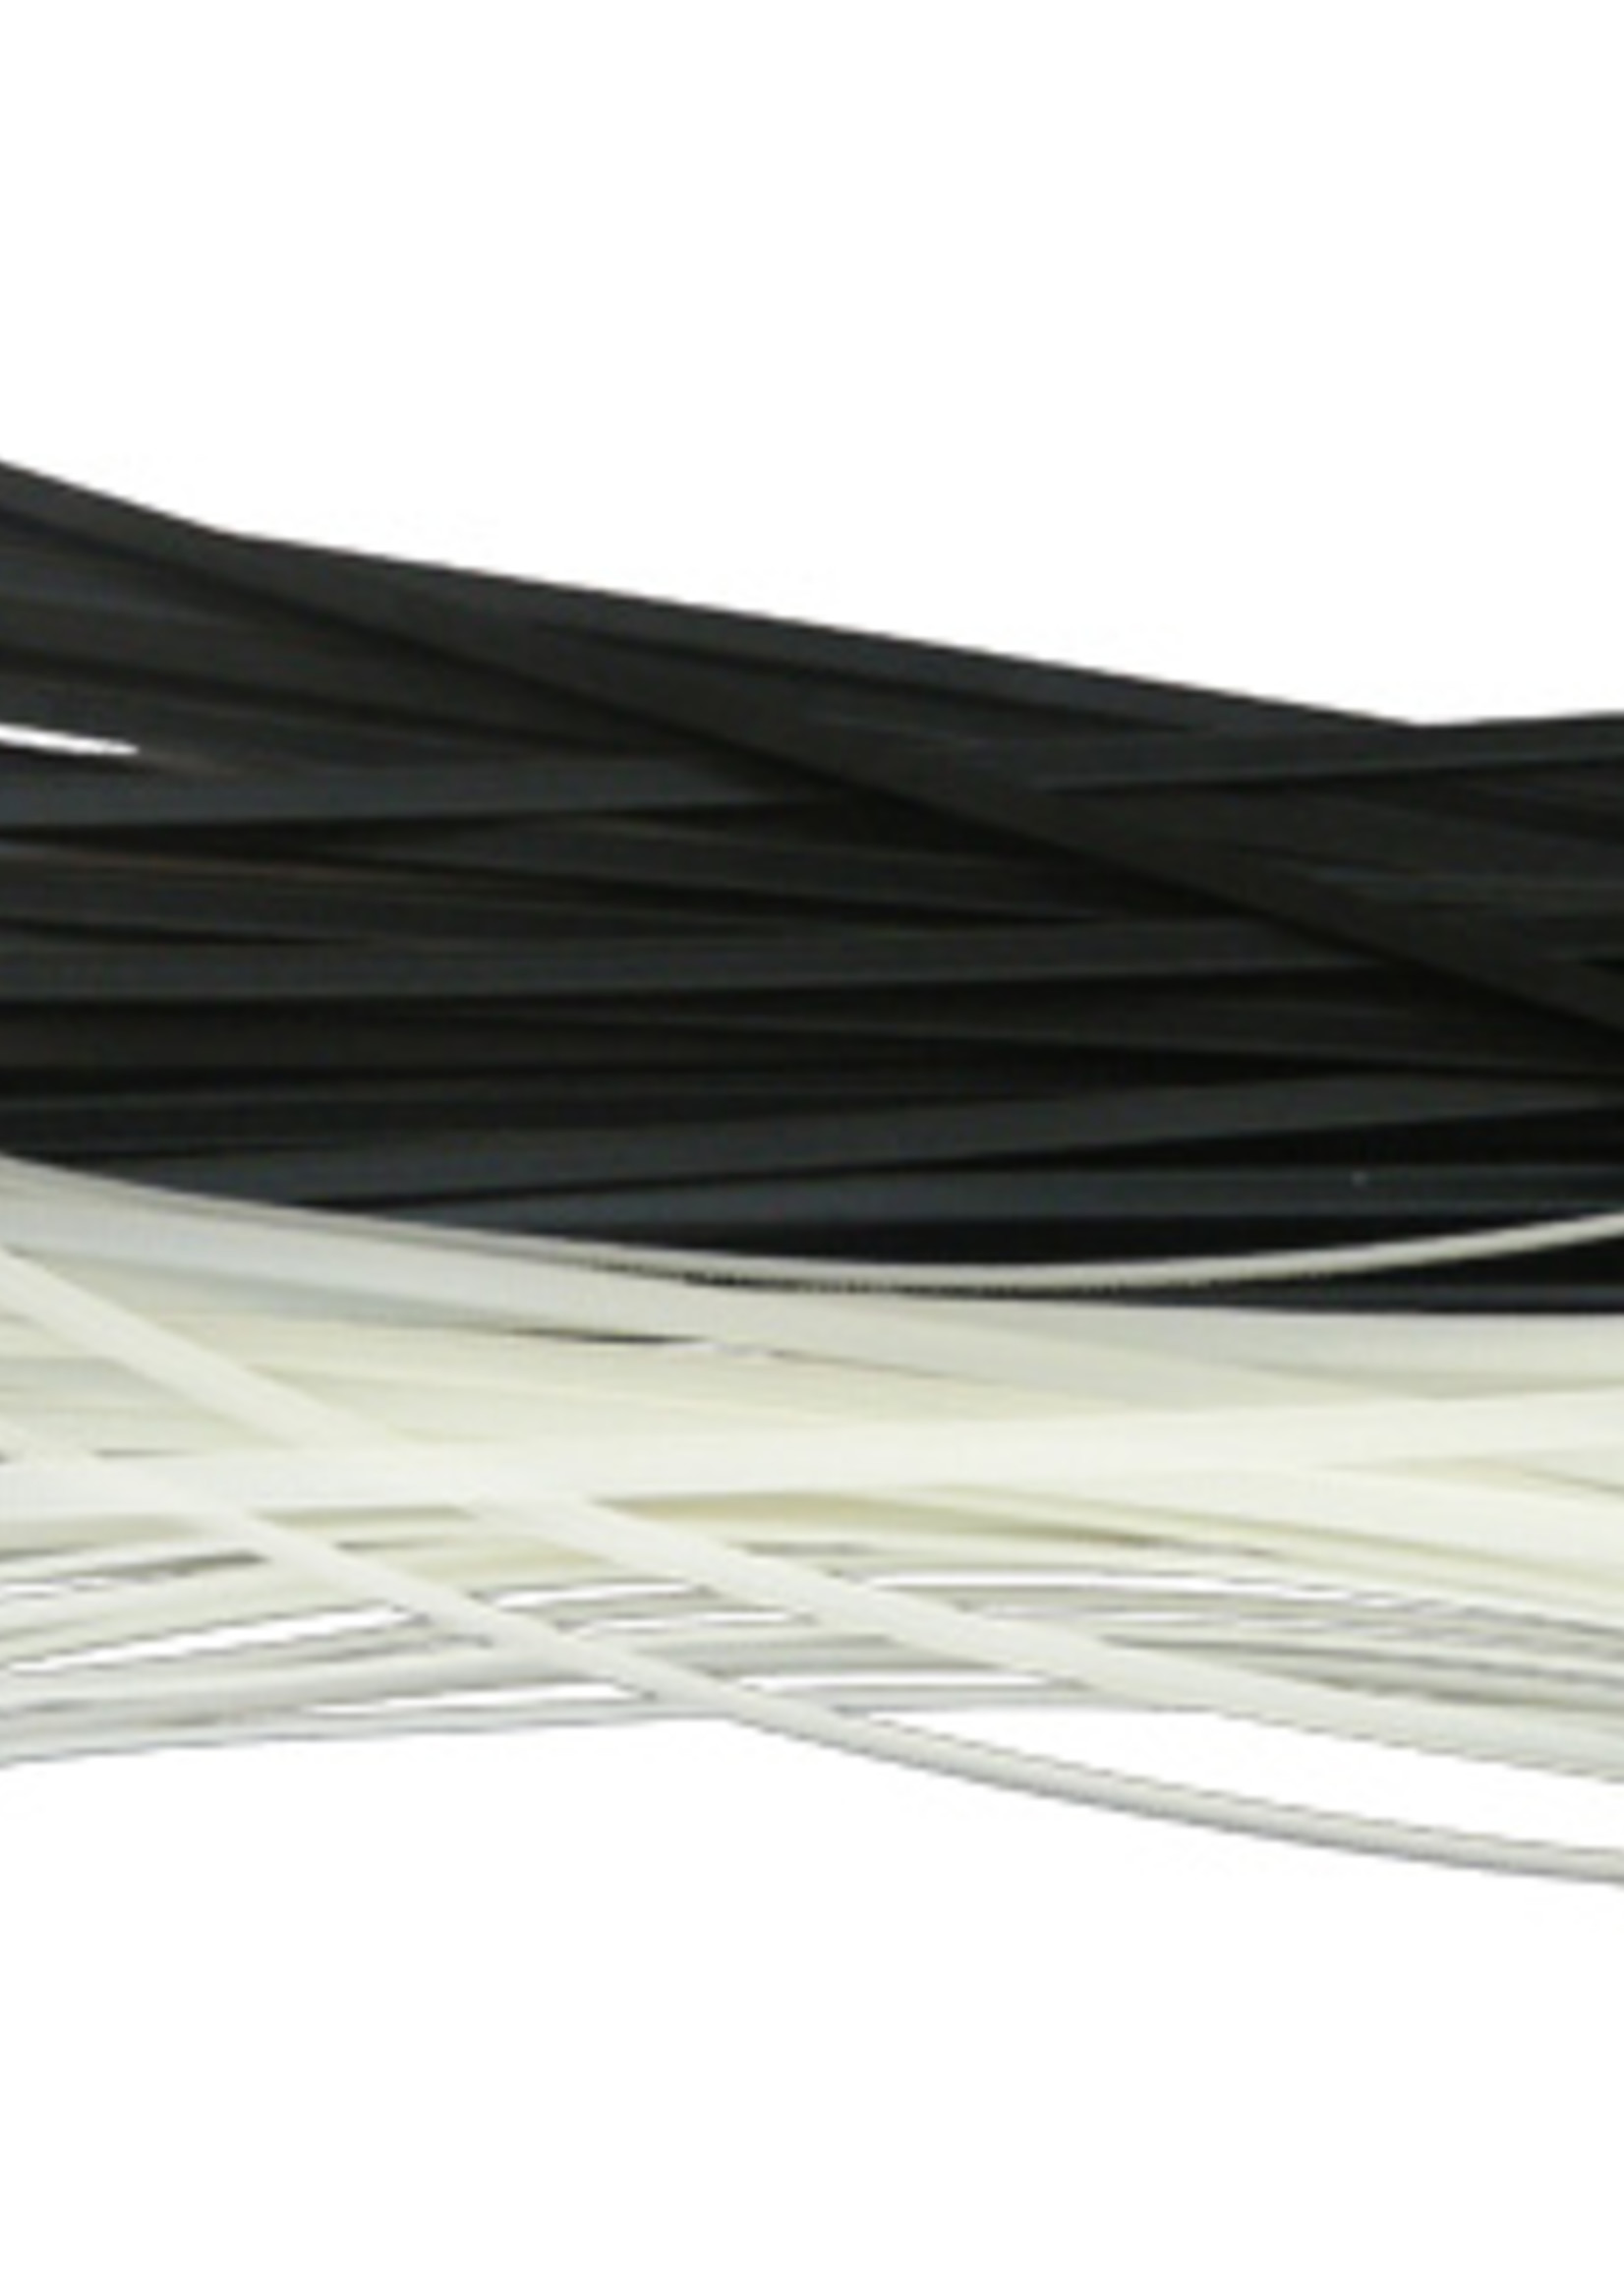 Pro-Power Pro-Power Cable Ties